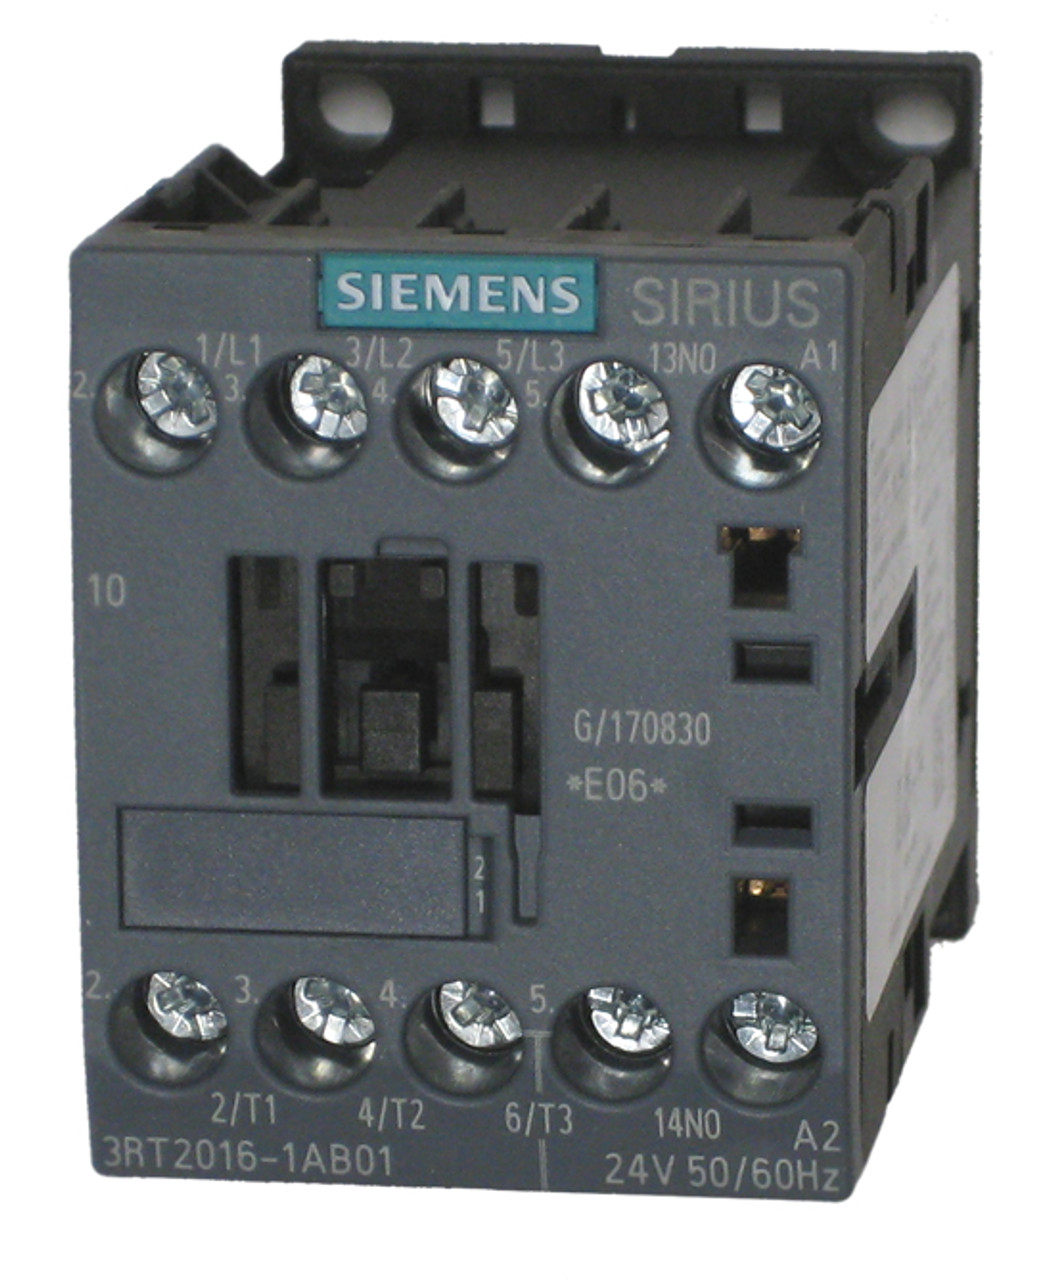 Siemens 3RT2016-1AD01 electrical contactor